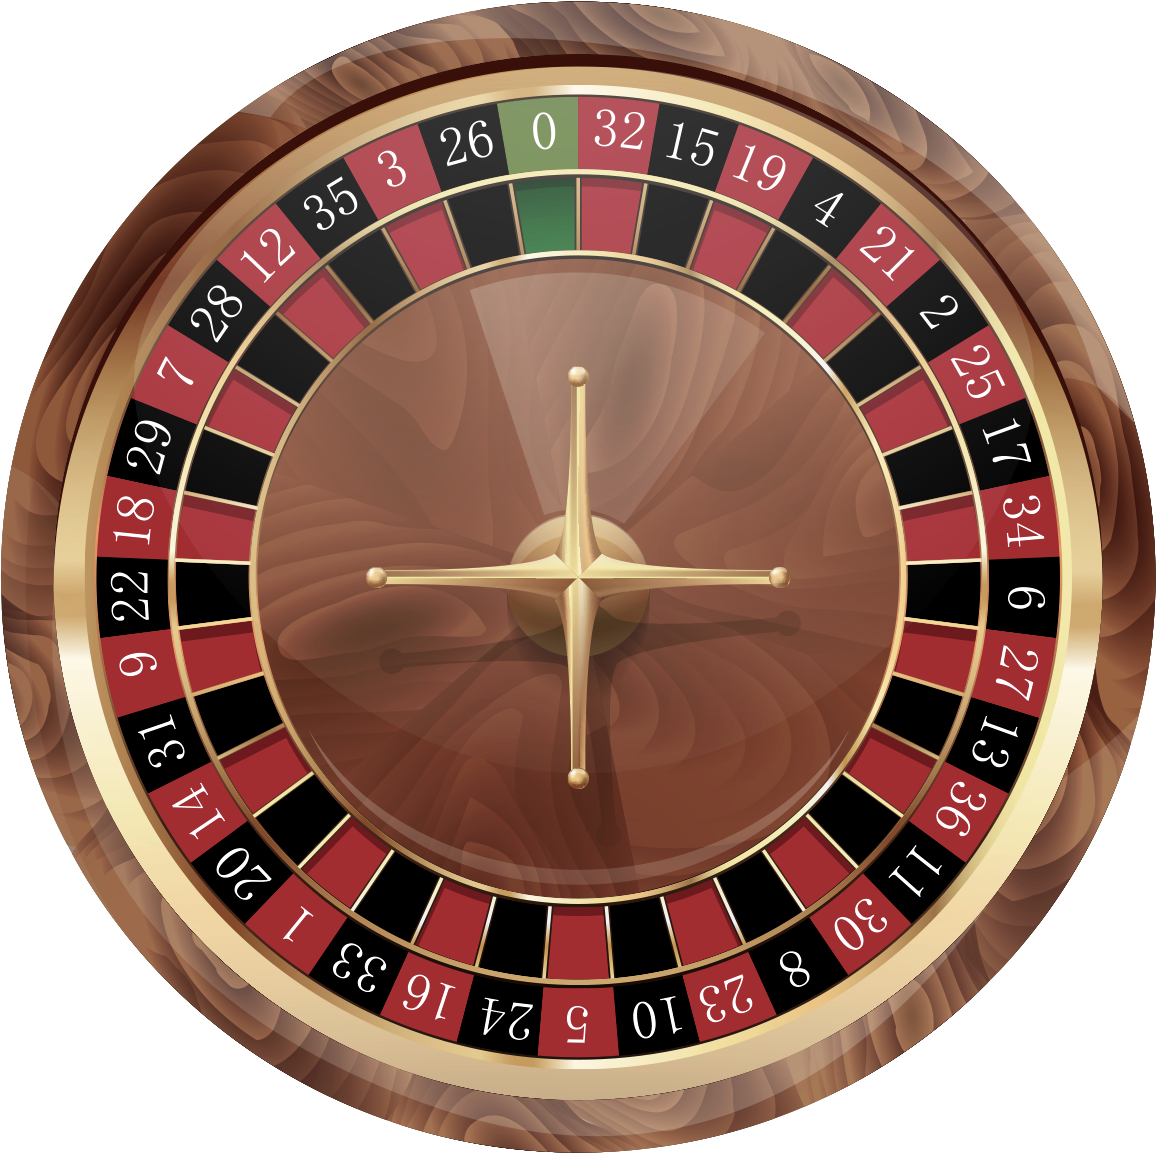 Perfect Roulette Wheel